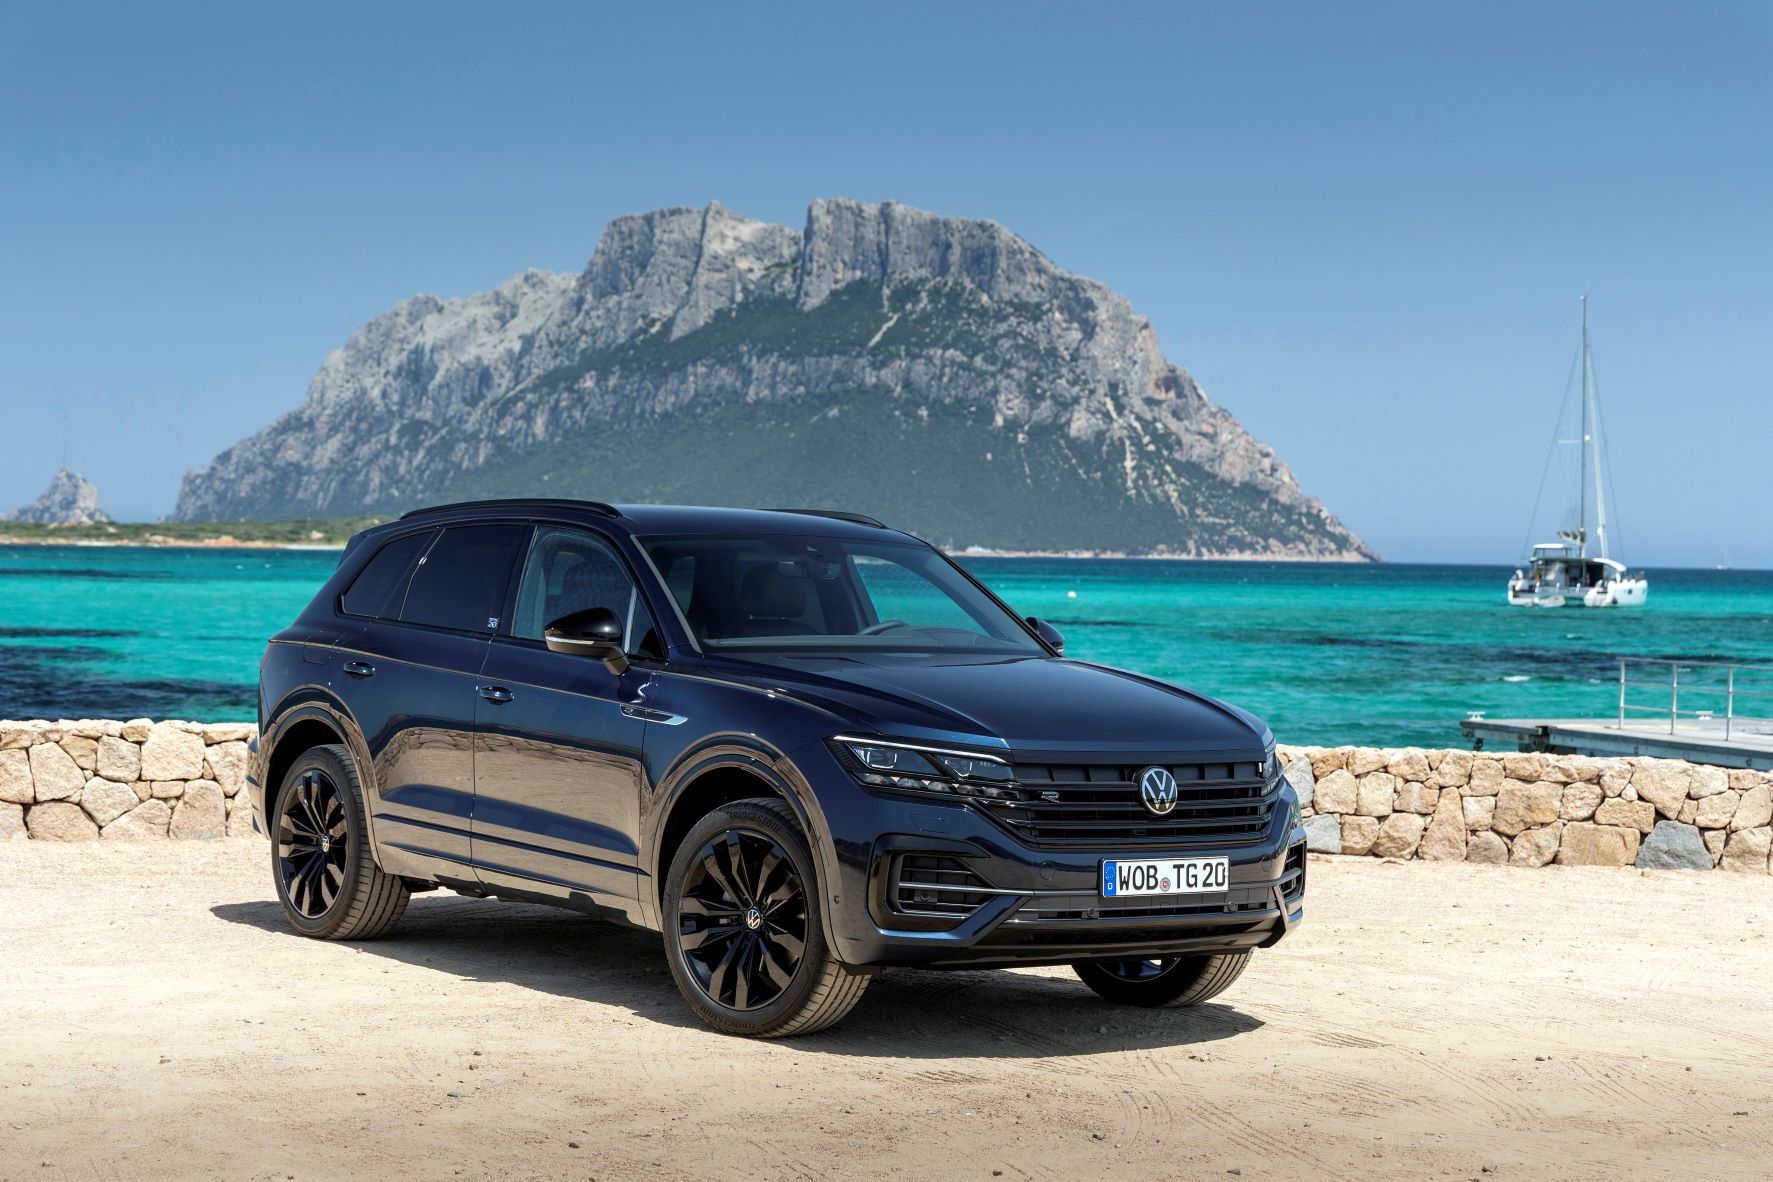 Front three quarters view of the Volkswagen Tiguan Edition 20